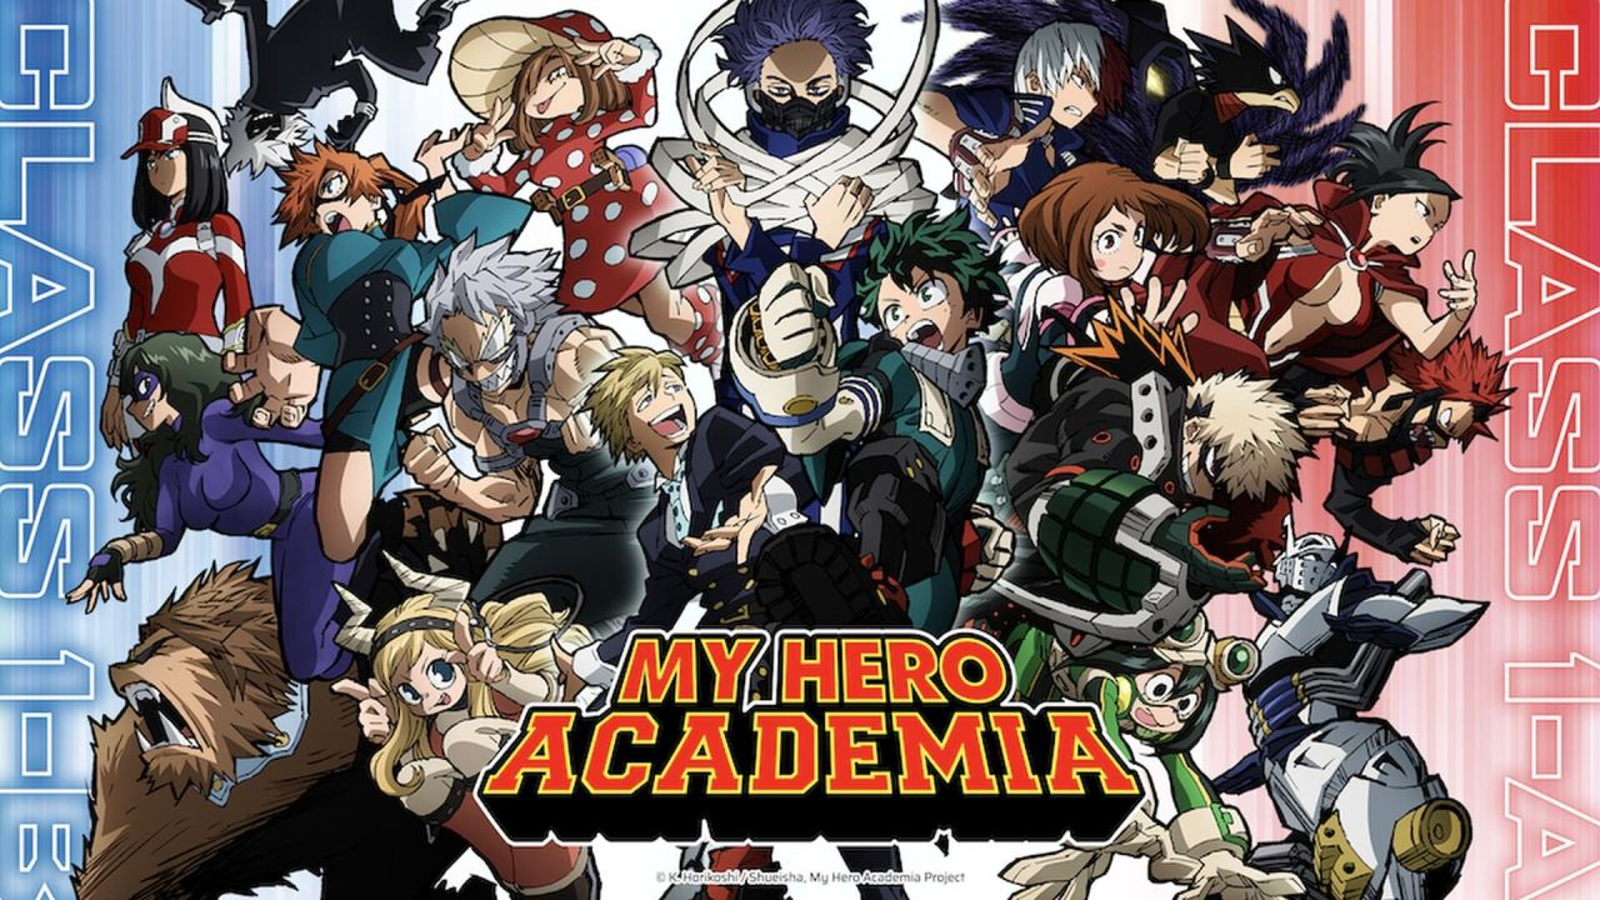 Which U.A. Student From My Hero Academia Are You?